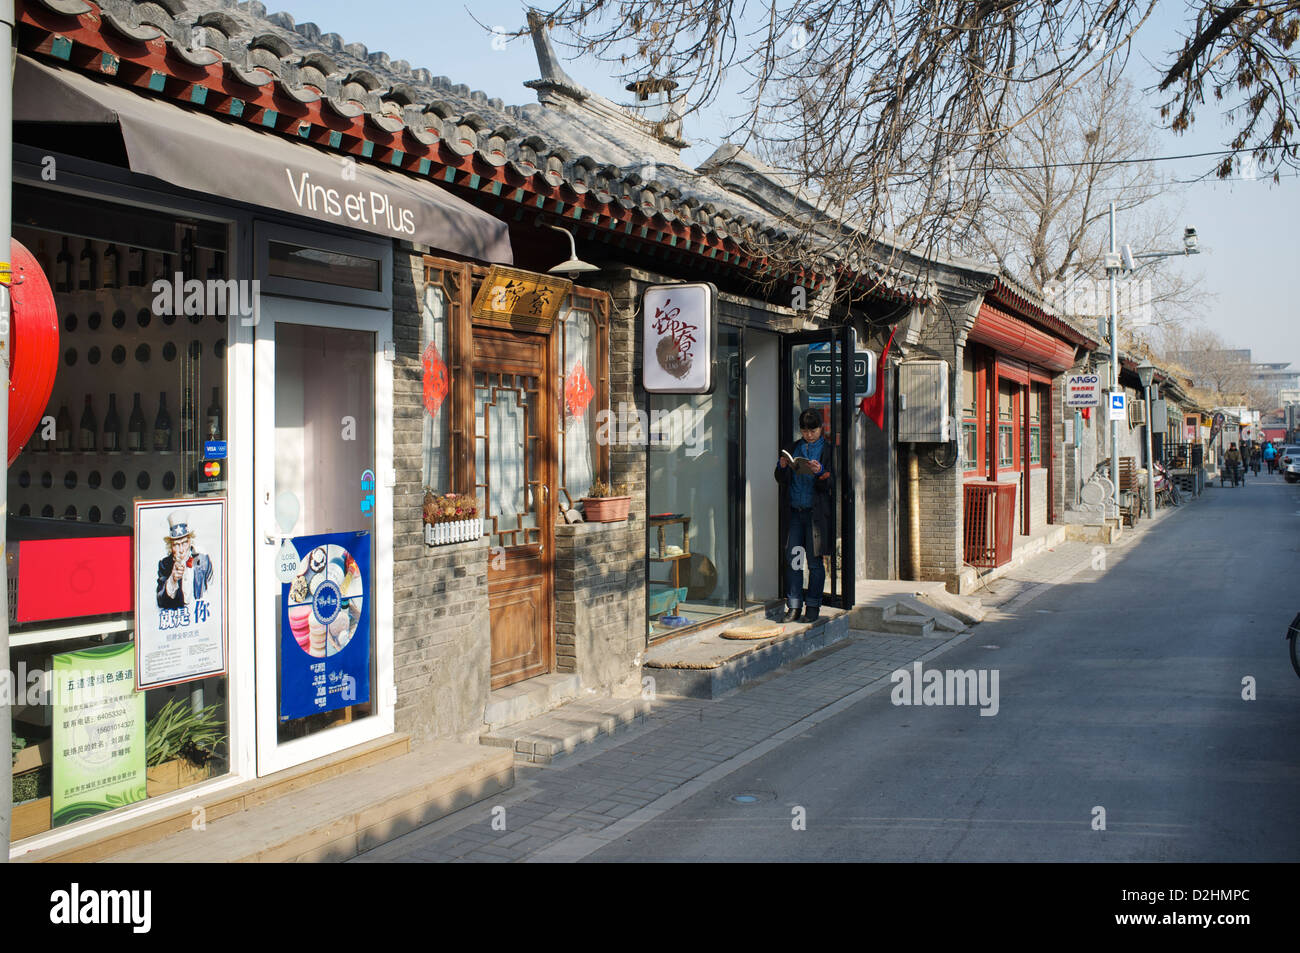 Wudaoying Hutong - some call it the next Nanluoguxiang alley in Beijing, China. 26-Jan-2013 Stock Photo